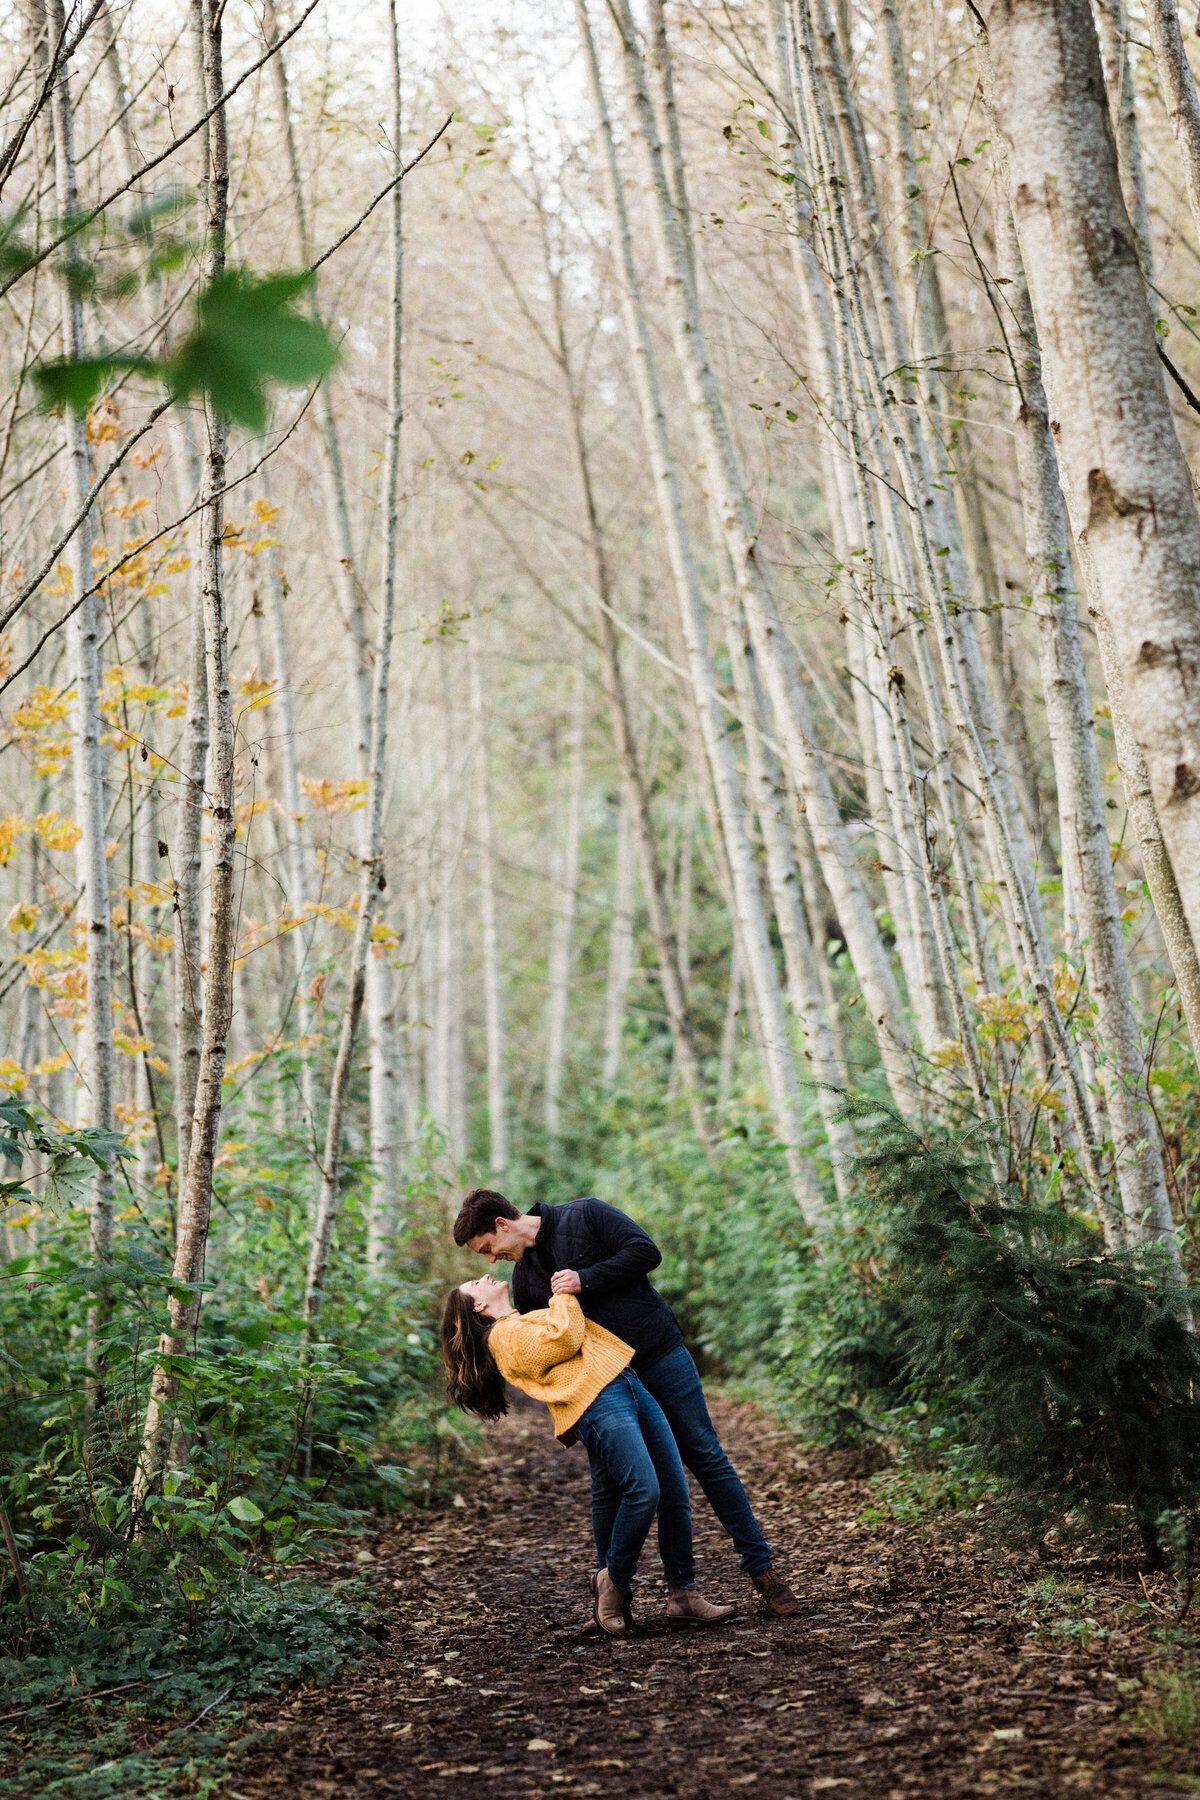 Birch trees make the mood romantic and intimate at best spot for engagement photos in Seattle, forests of Discovery Park